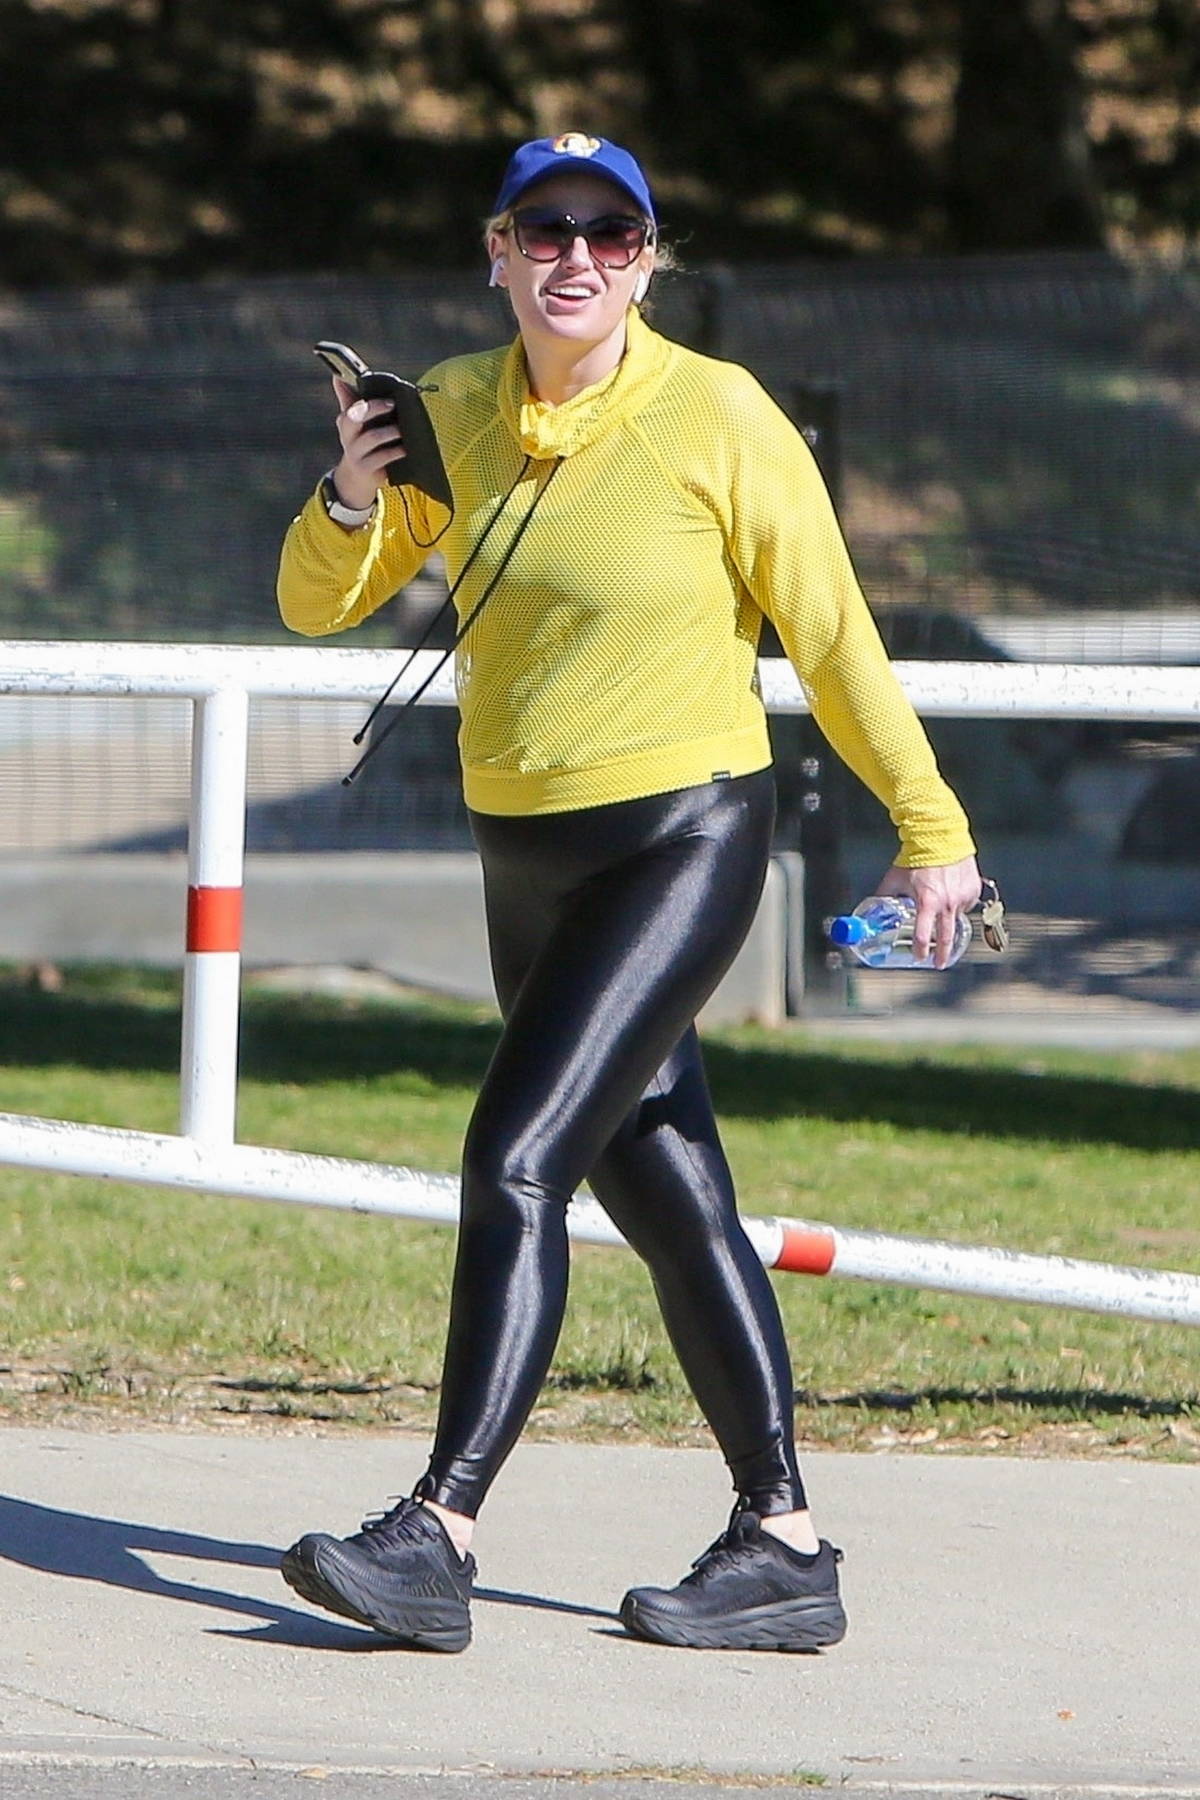 https://www.celebsfirst.com/wp-content/uploads/2021/02/rebel-wilson-stands-out-in-bright-yellow-hoodie-and-black-leggings-while-out-for-hike-in-los-feliz-california-230221_1.jpg